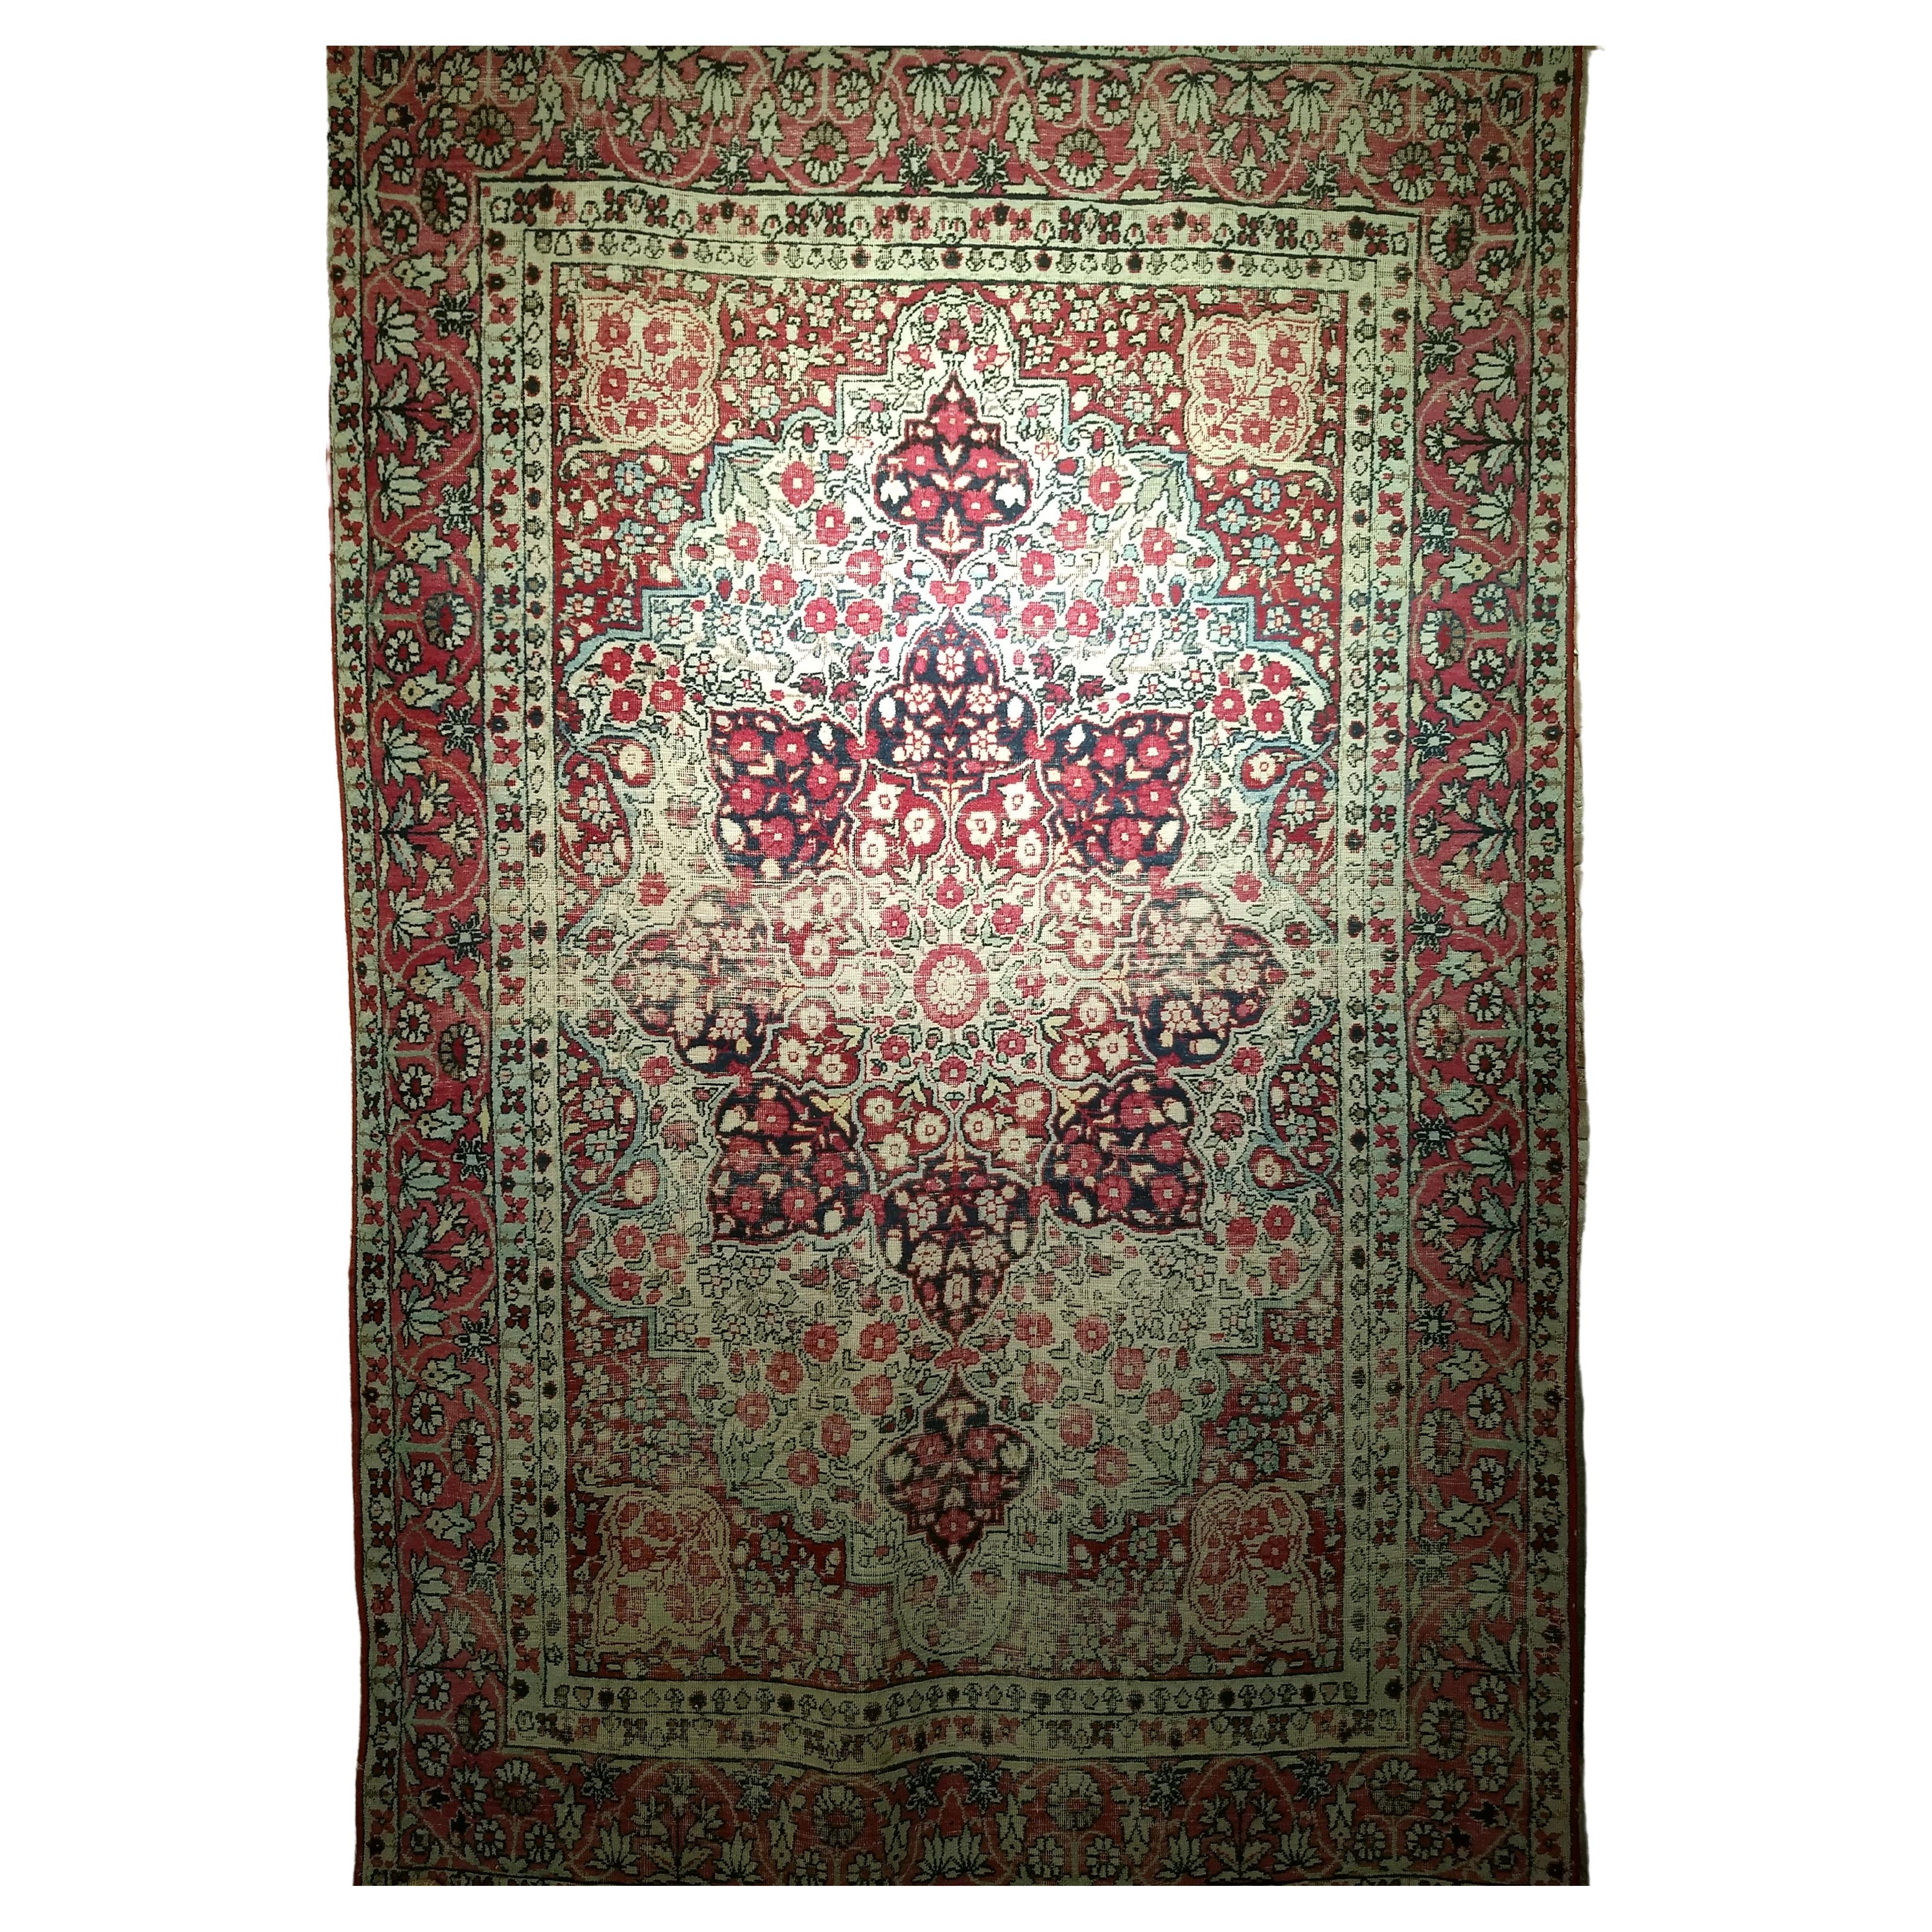 19th Century Persian Kerman Lavar Area Rug in Floral Design in Red, Ivory, Black For Sale